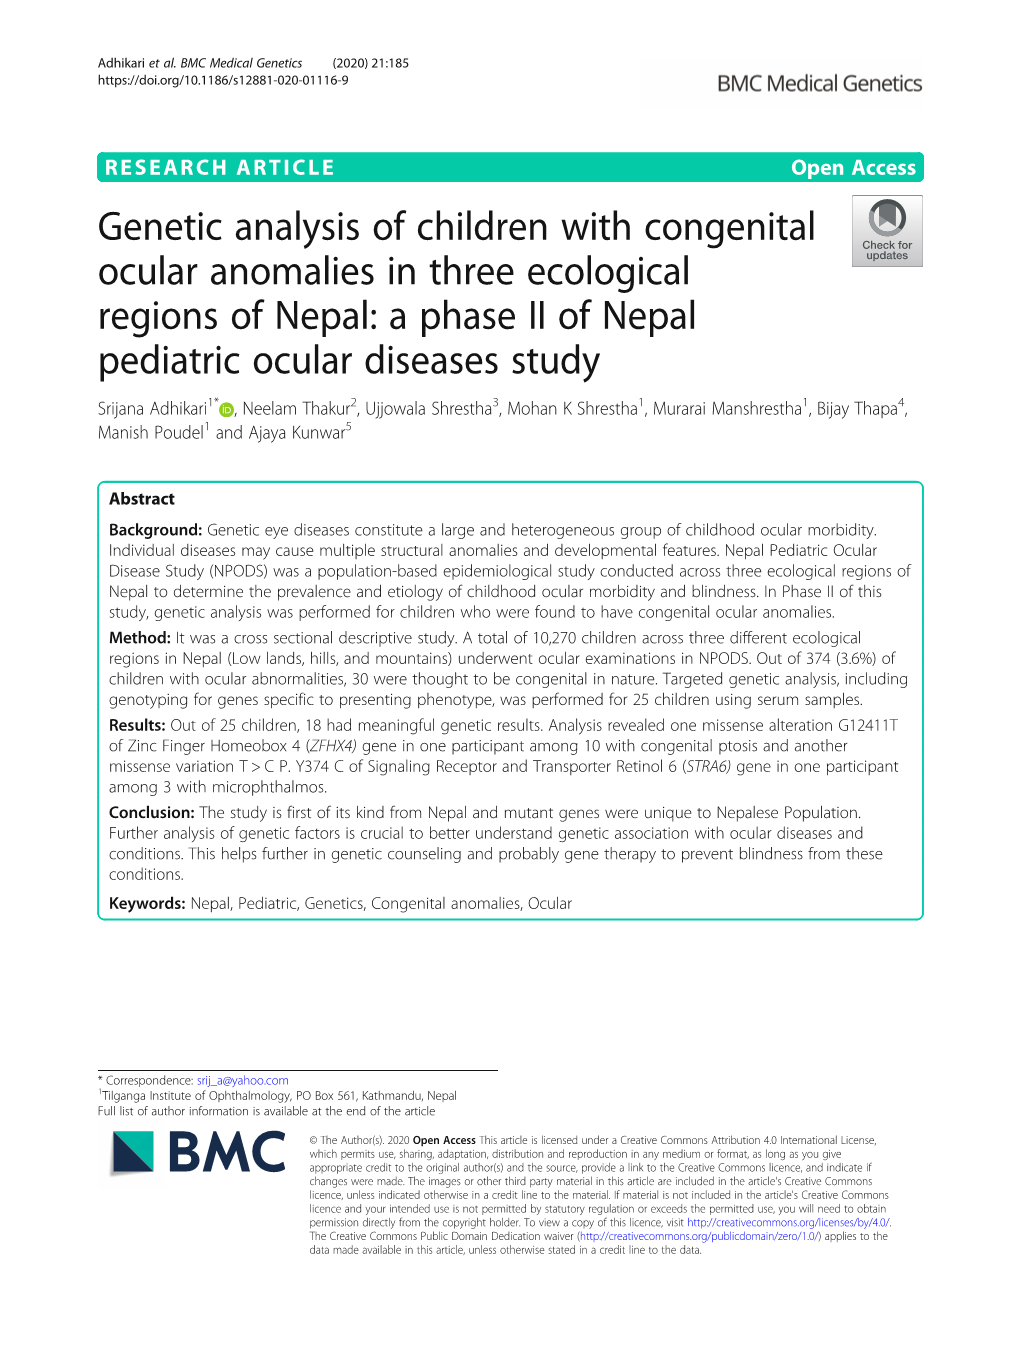 Genetic Analysis of Children with Congenital Ocular Anomalies in Three Ecological Regions of Nepal